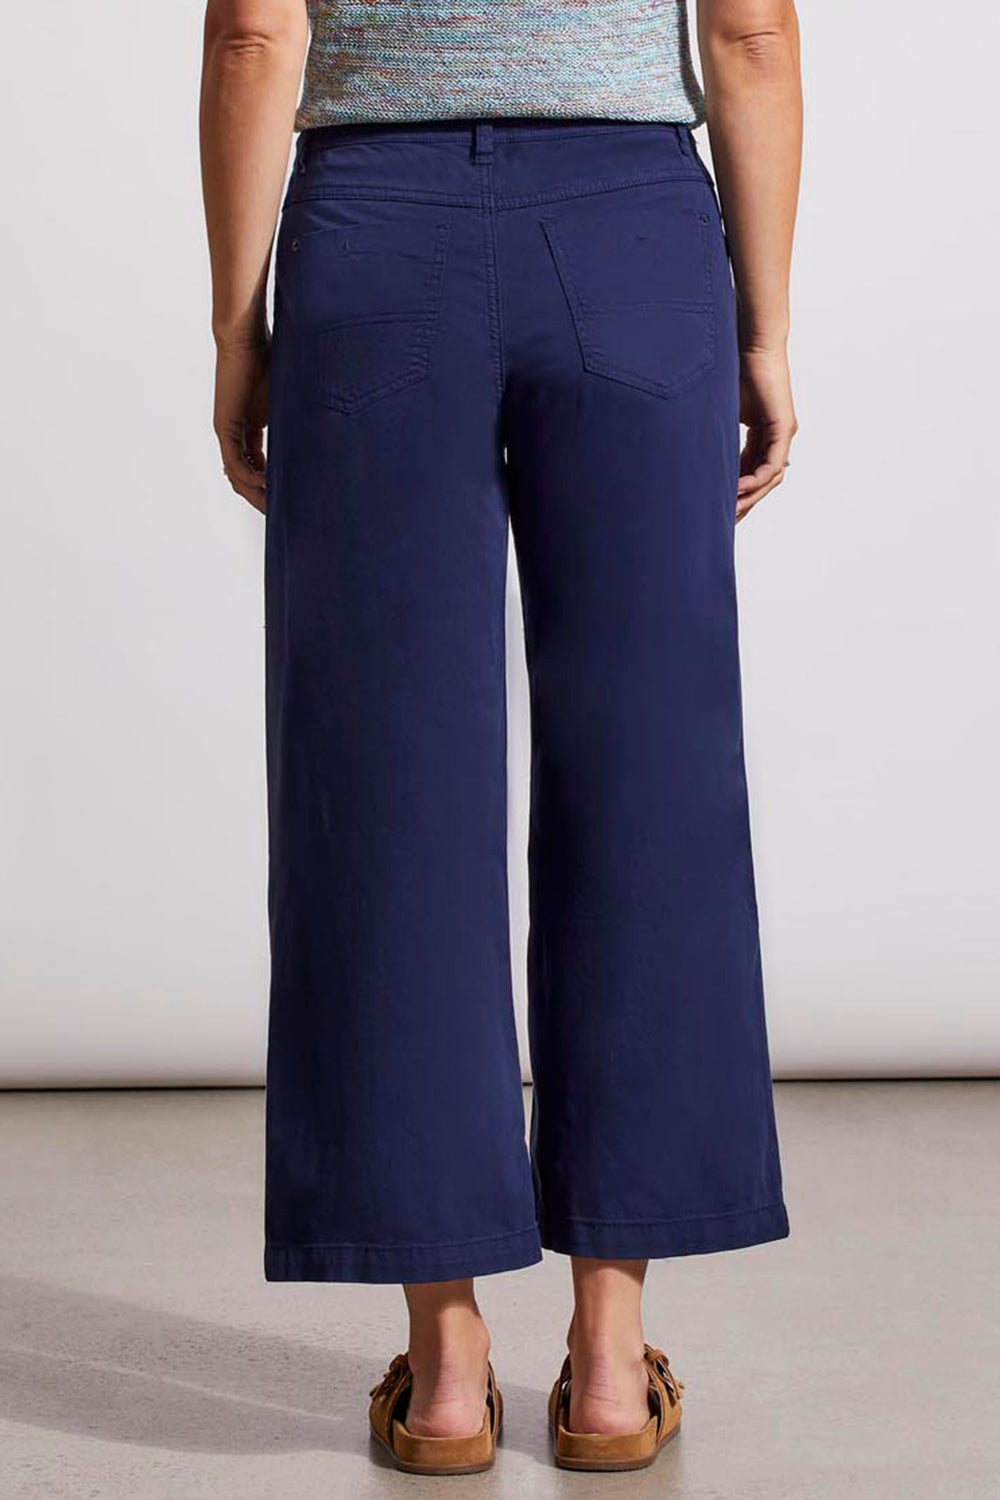 Tribal 5404O Nautical Navy Cotton Straight Leg Trousers - Experience Boutique